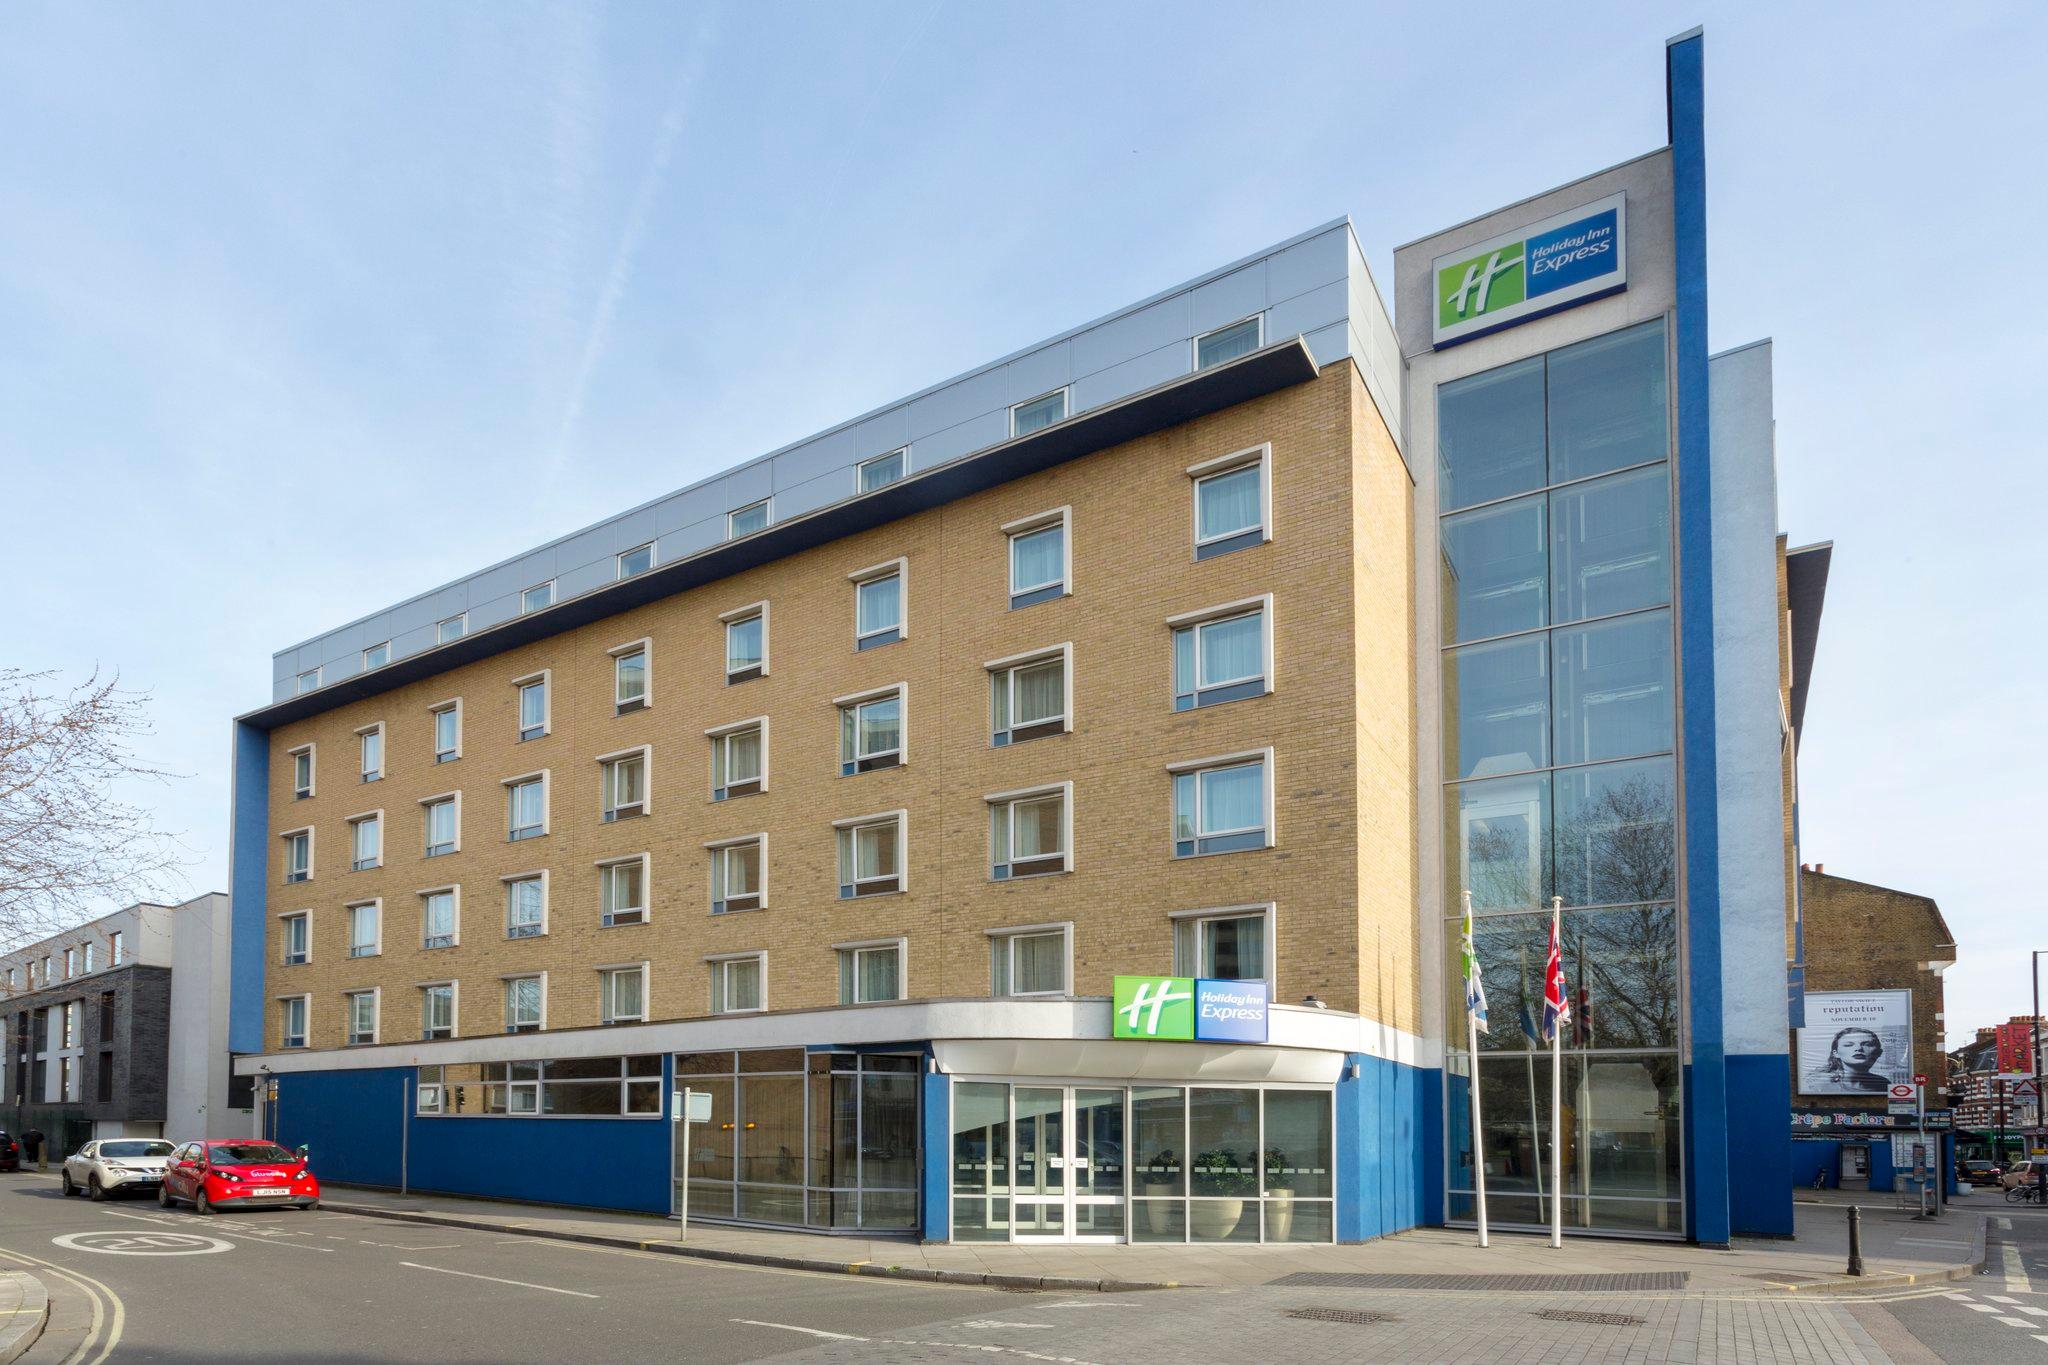 Holiday Inn Express London - Earl's Court in London, GB1